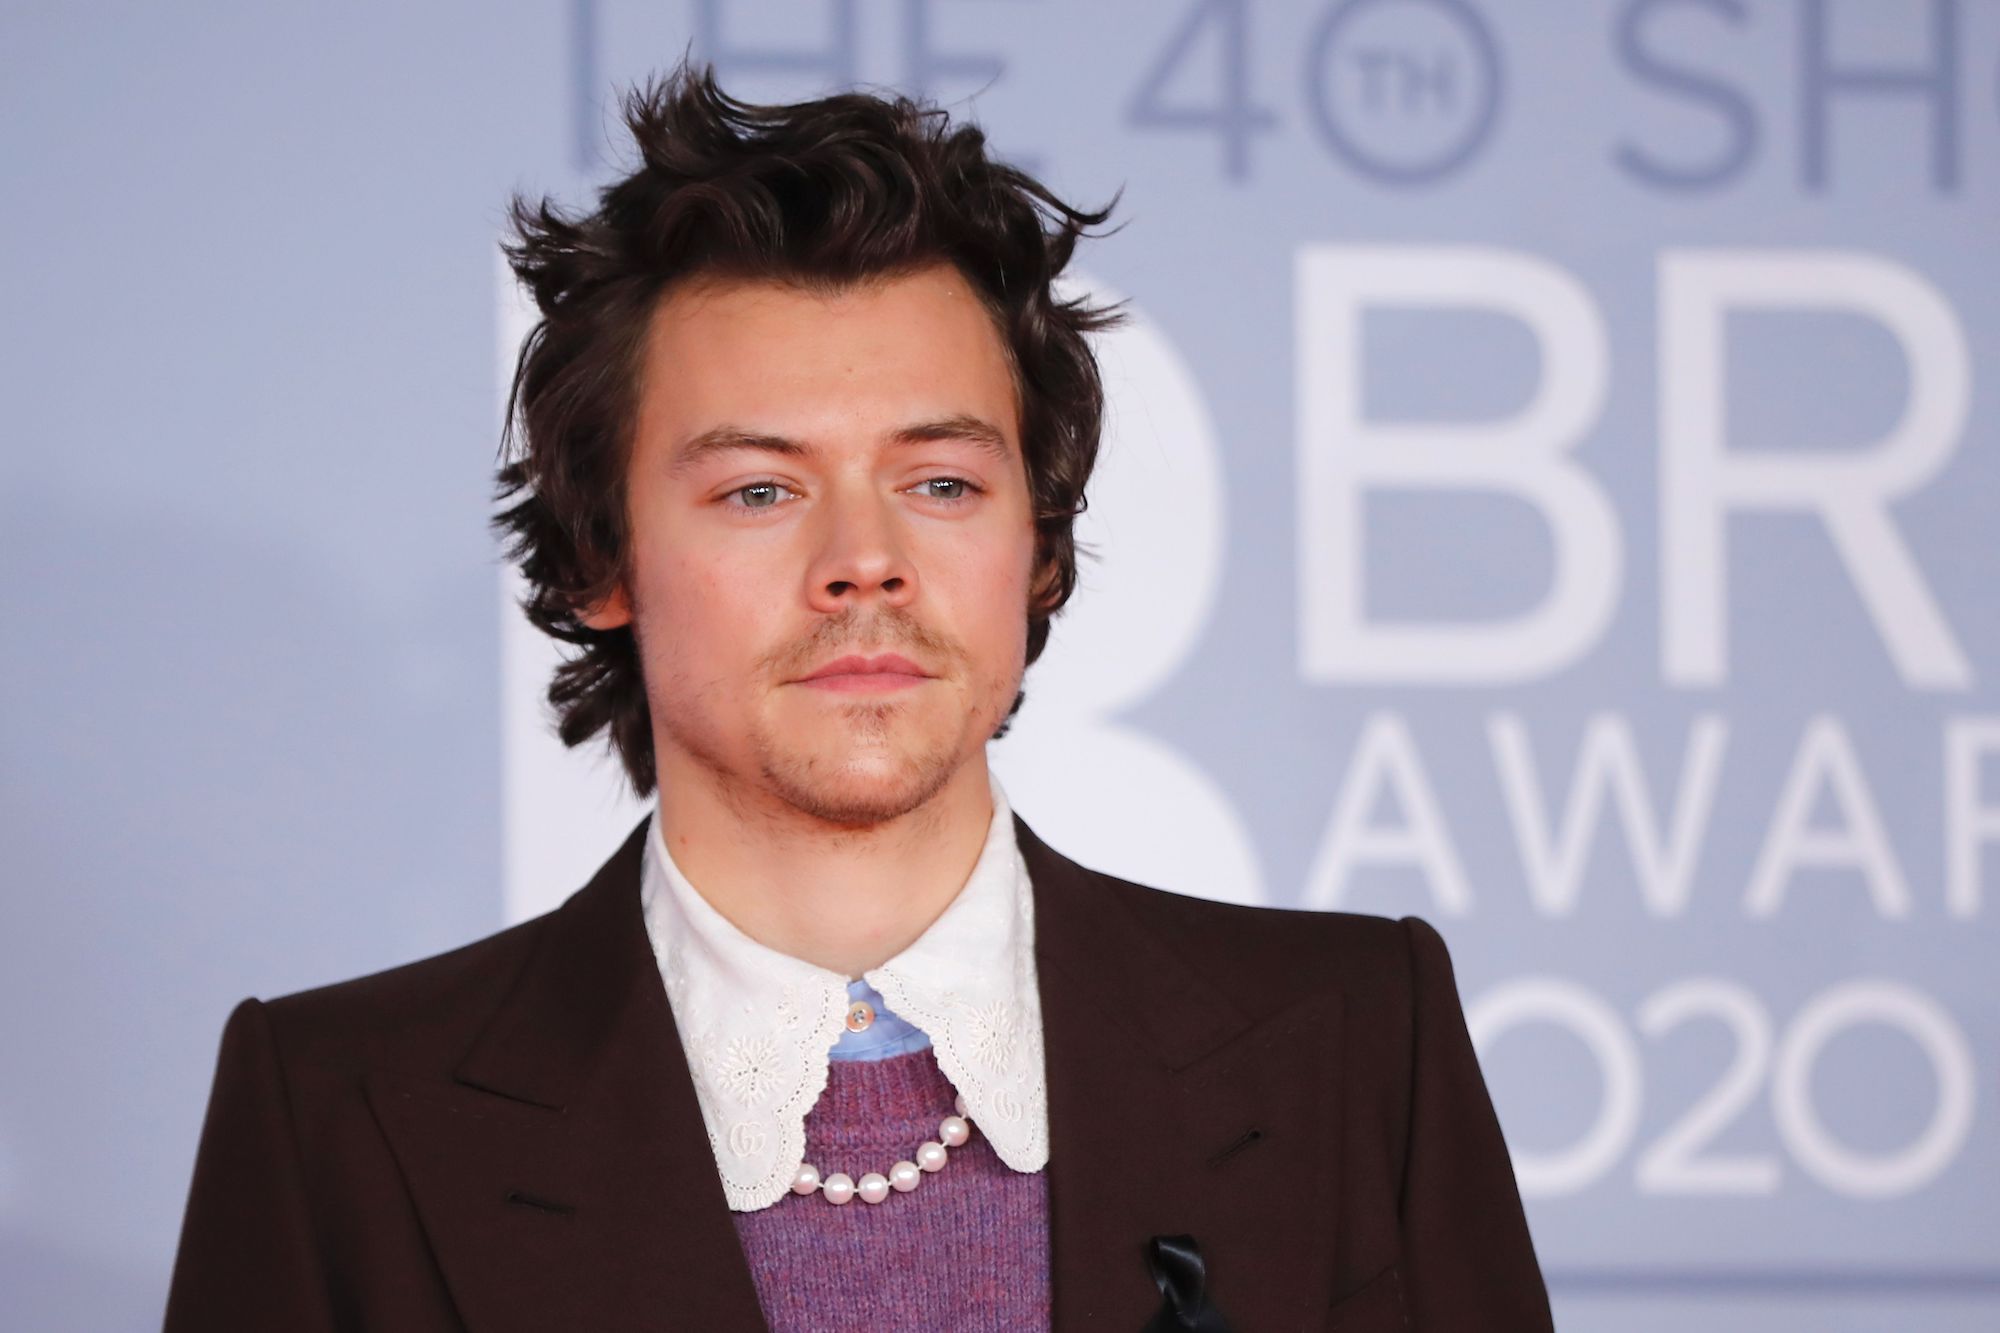 Harry Styles on the red carpet on arrival for the BRIT Awards 2020 in London on February 18, 2020.